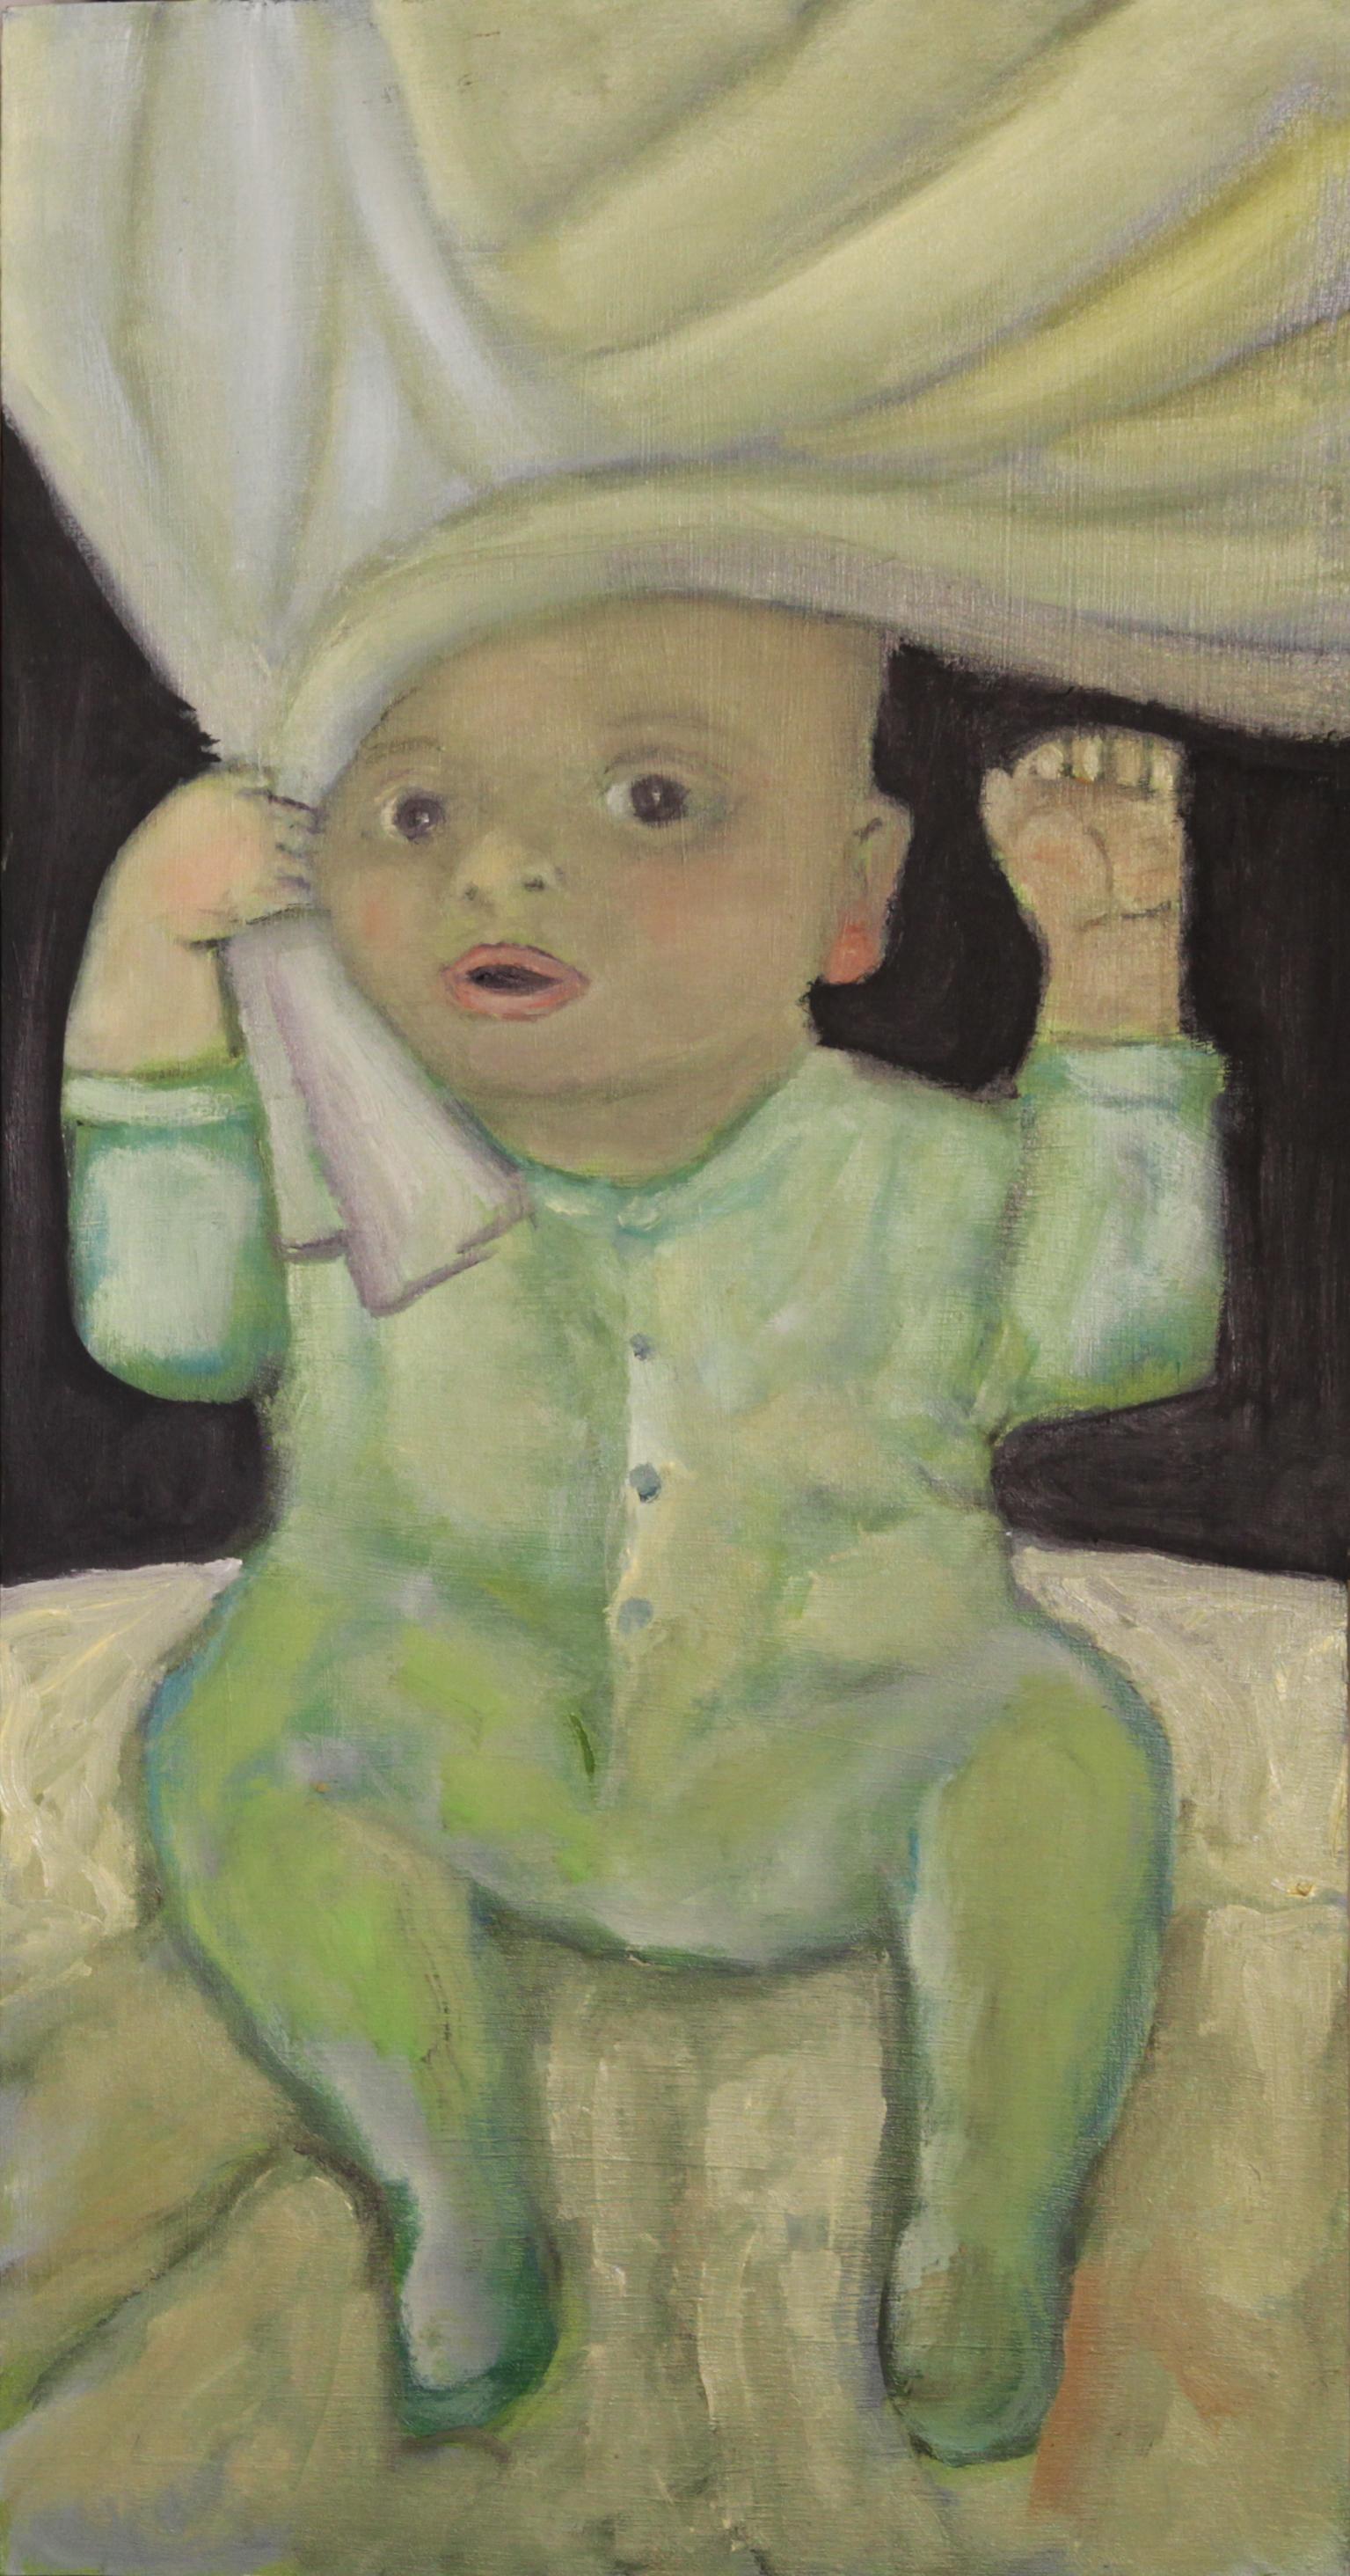 Stephen Basso Figurative Painting - Towel Prince.  Baby in soft color sleepy dreamlike happy character